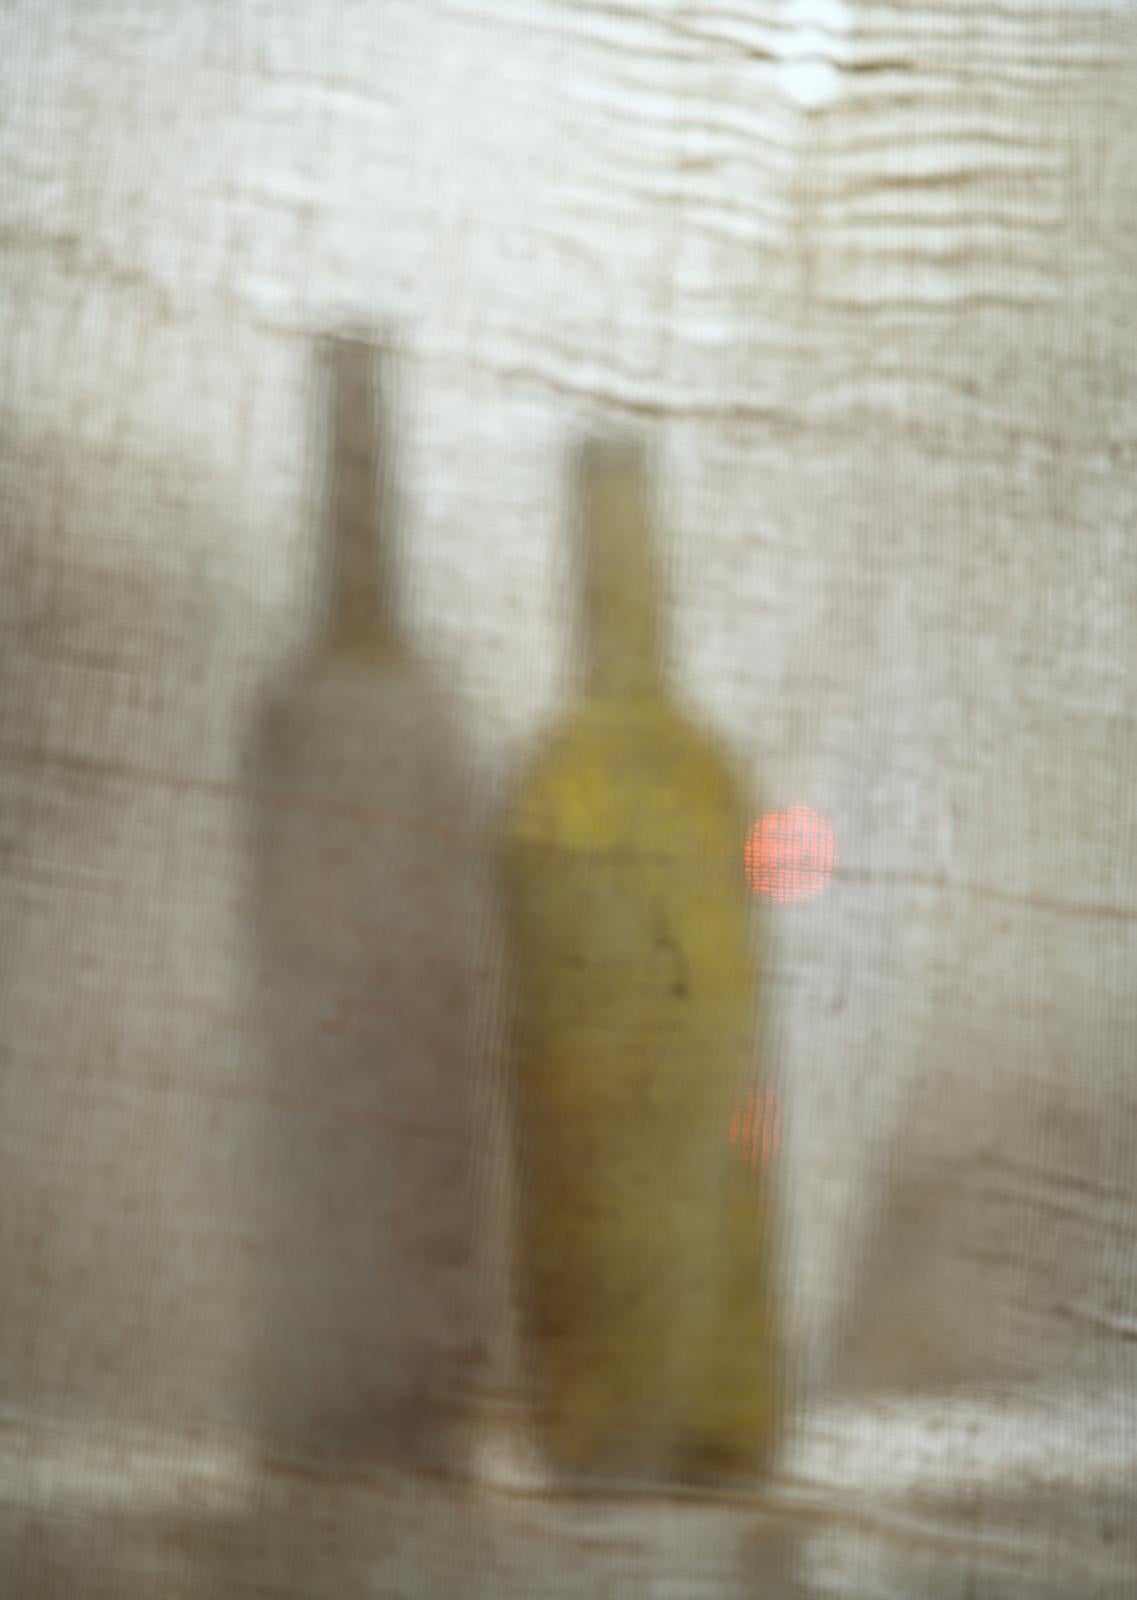 'It Will Rain Tomorrow' by Vitalii Ledokollov -  is a beautiful minimalist abstract figurative photography print. Bottles are used to create a subtle effect of figures. The artist brings life to ordinary subjects and reflects on relationships in the